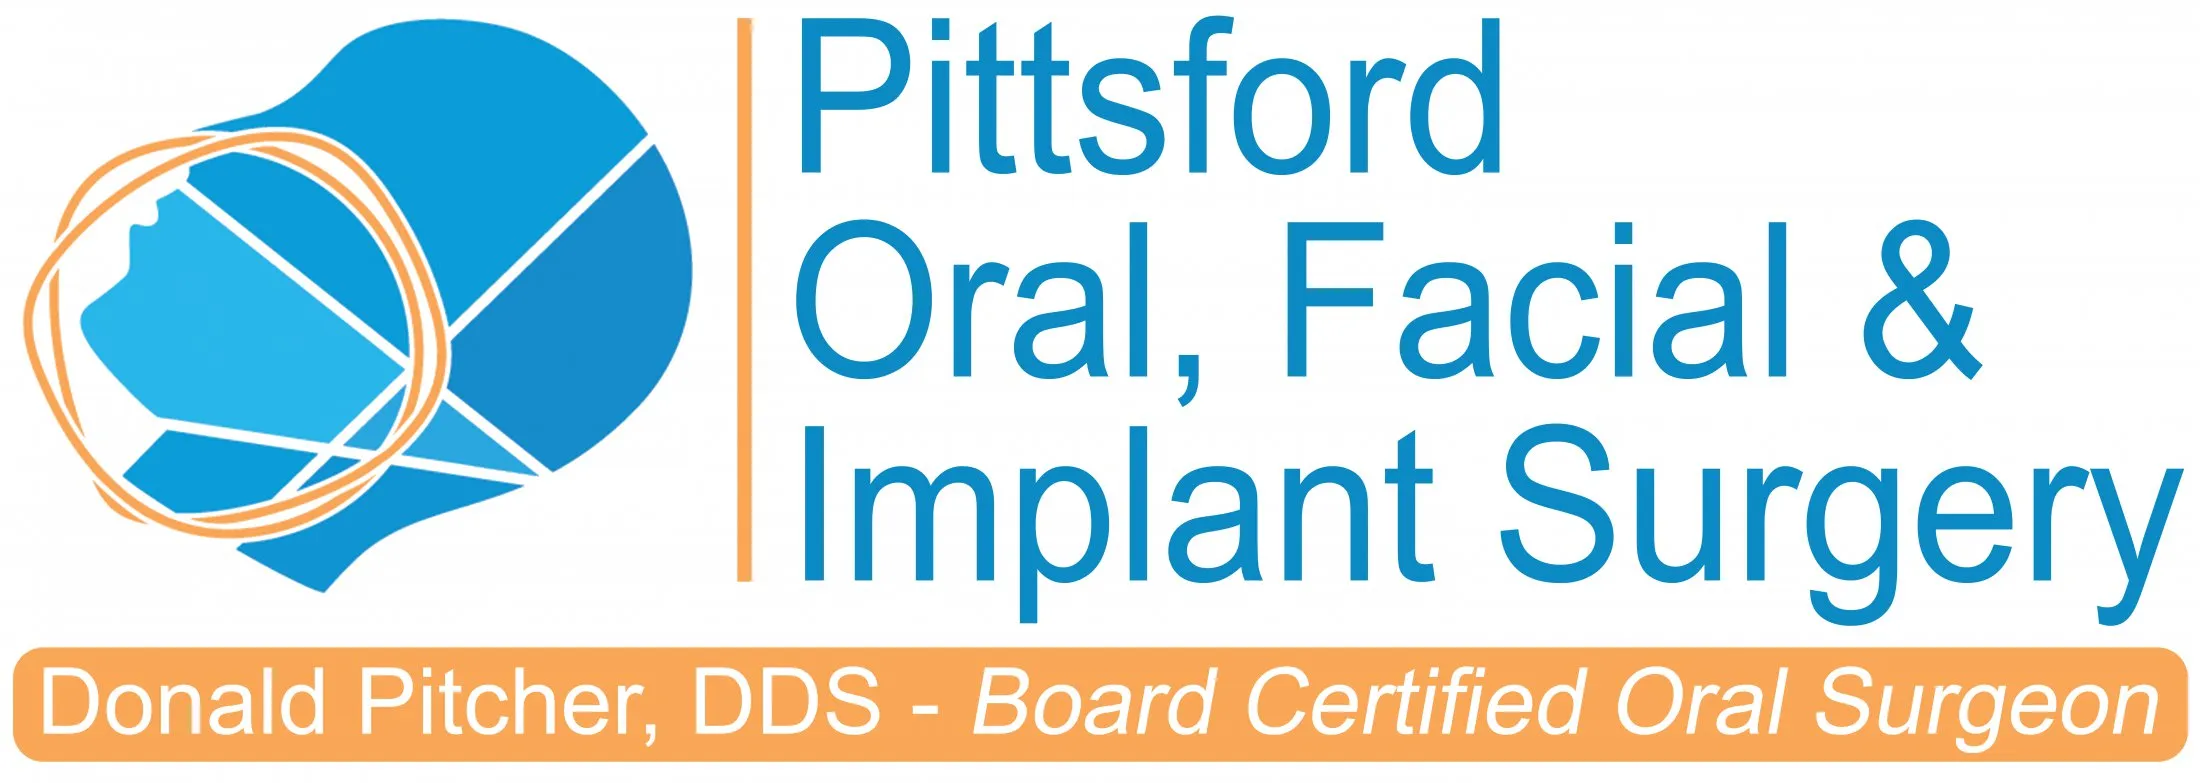 Link to Pittsford, Oral, Facial & Implant Surgery home page